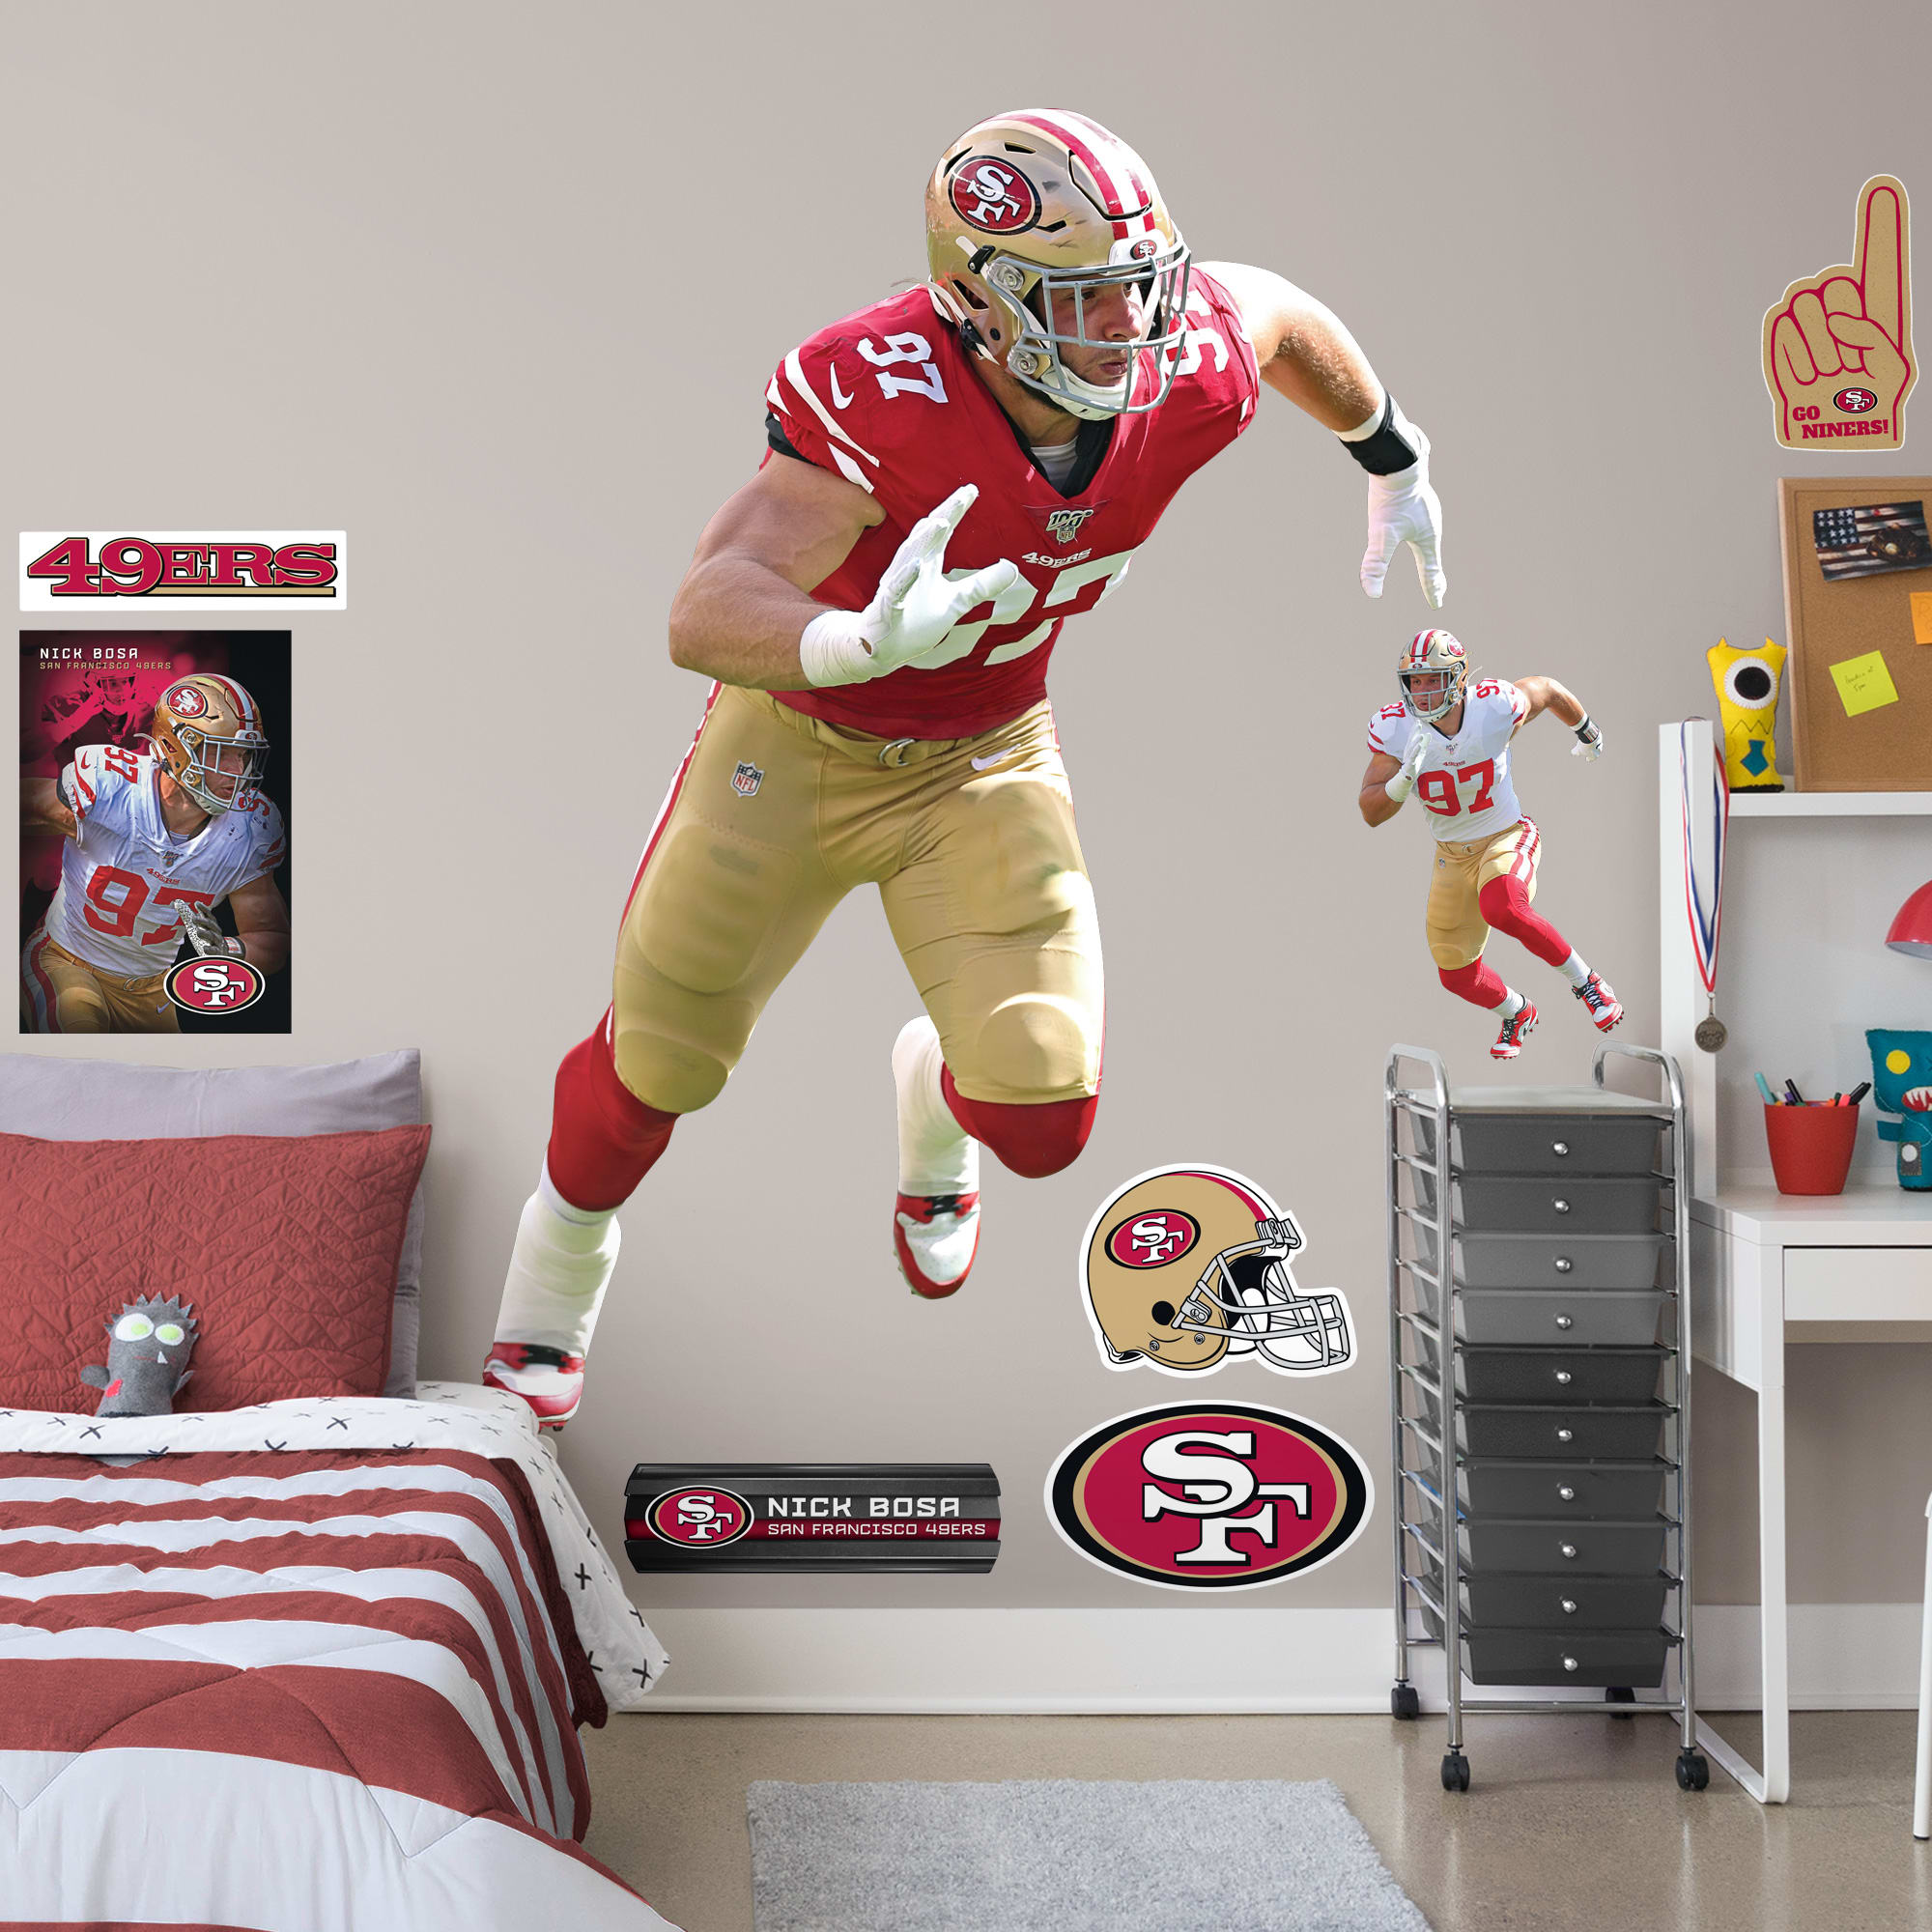 Nick Bosa for San Francisco 49ers - Officially Licensed NFL Removable Wall Decal Life-Size Athlete + 9 Decals (54"W x 74"H) by F